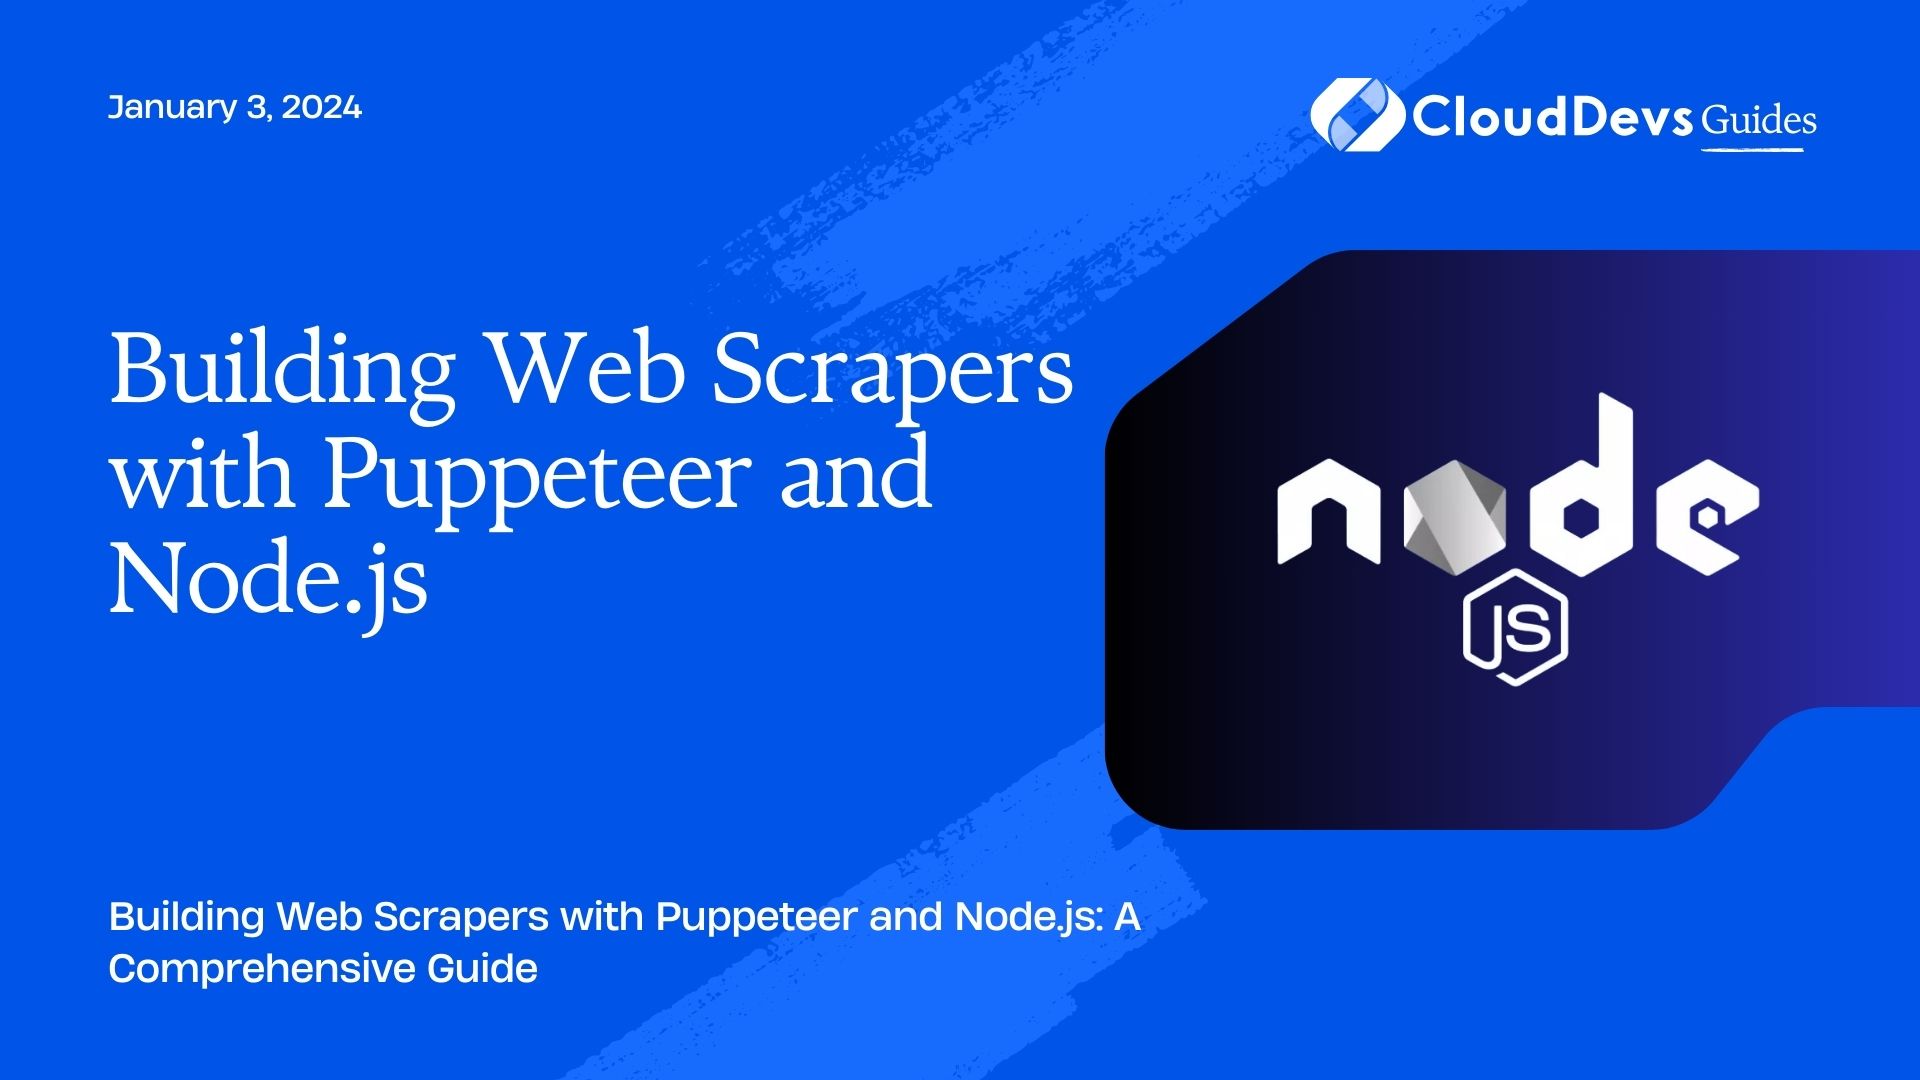 Building Web Scrapers with Puppeteer and Node.js